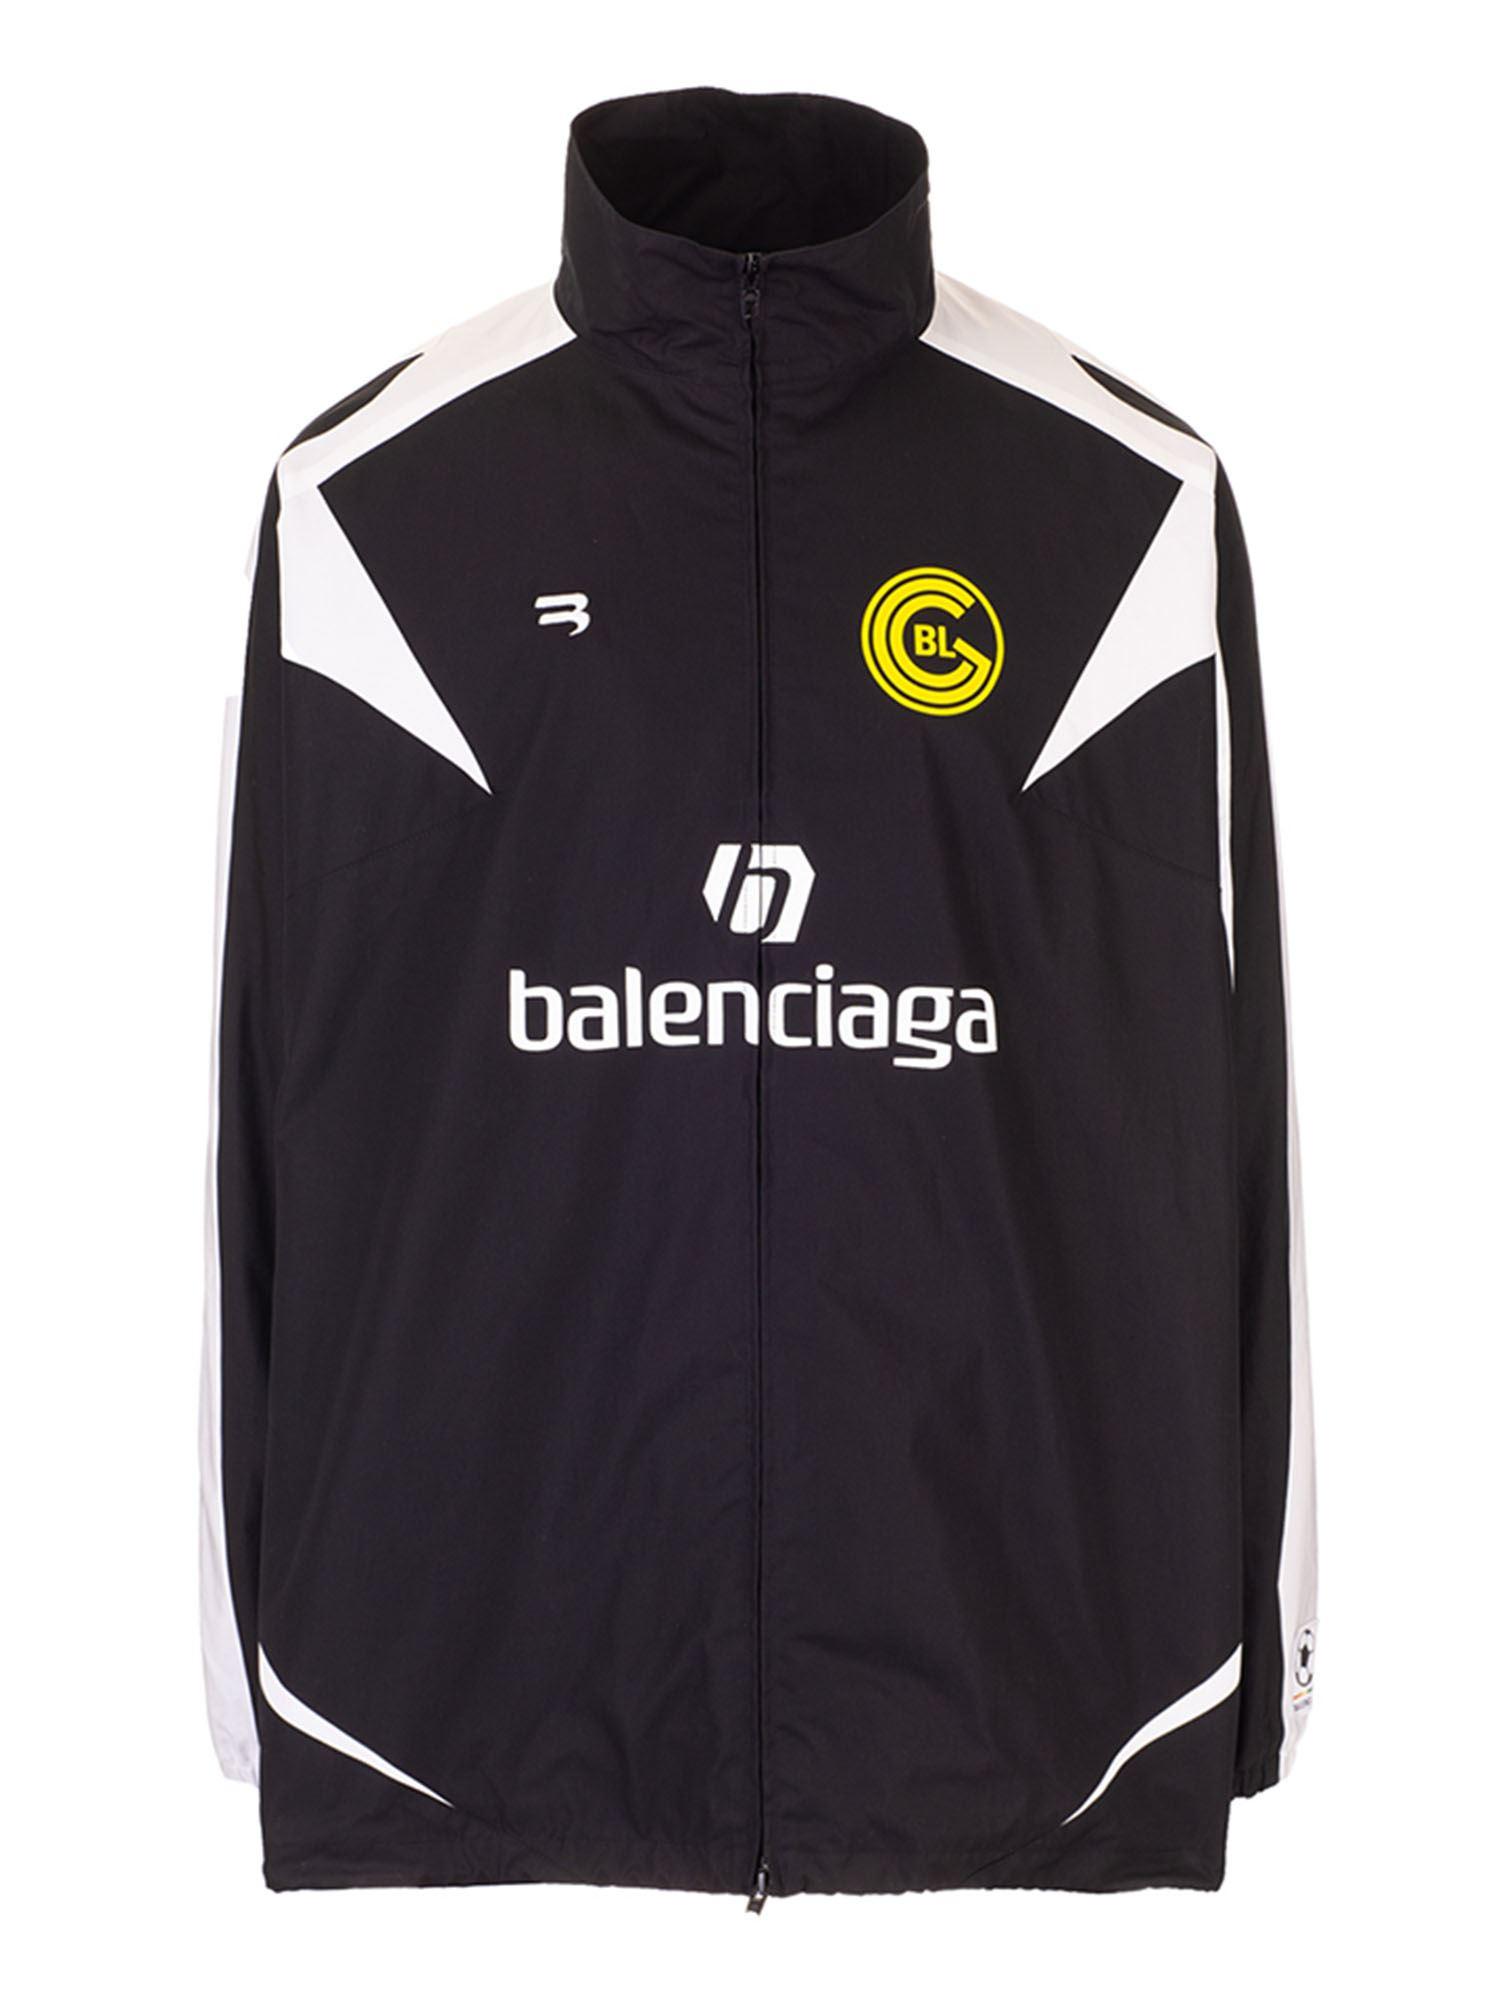 Balenciaga Cotton Soccer Zip-up Tracksuit in Black for Men - Lyst